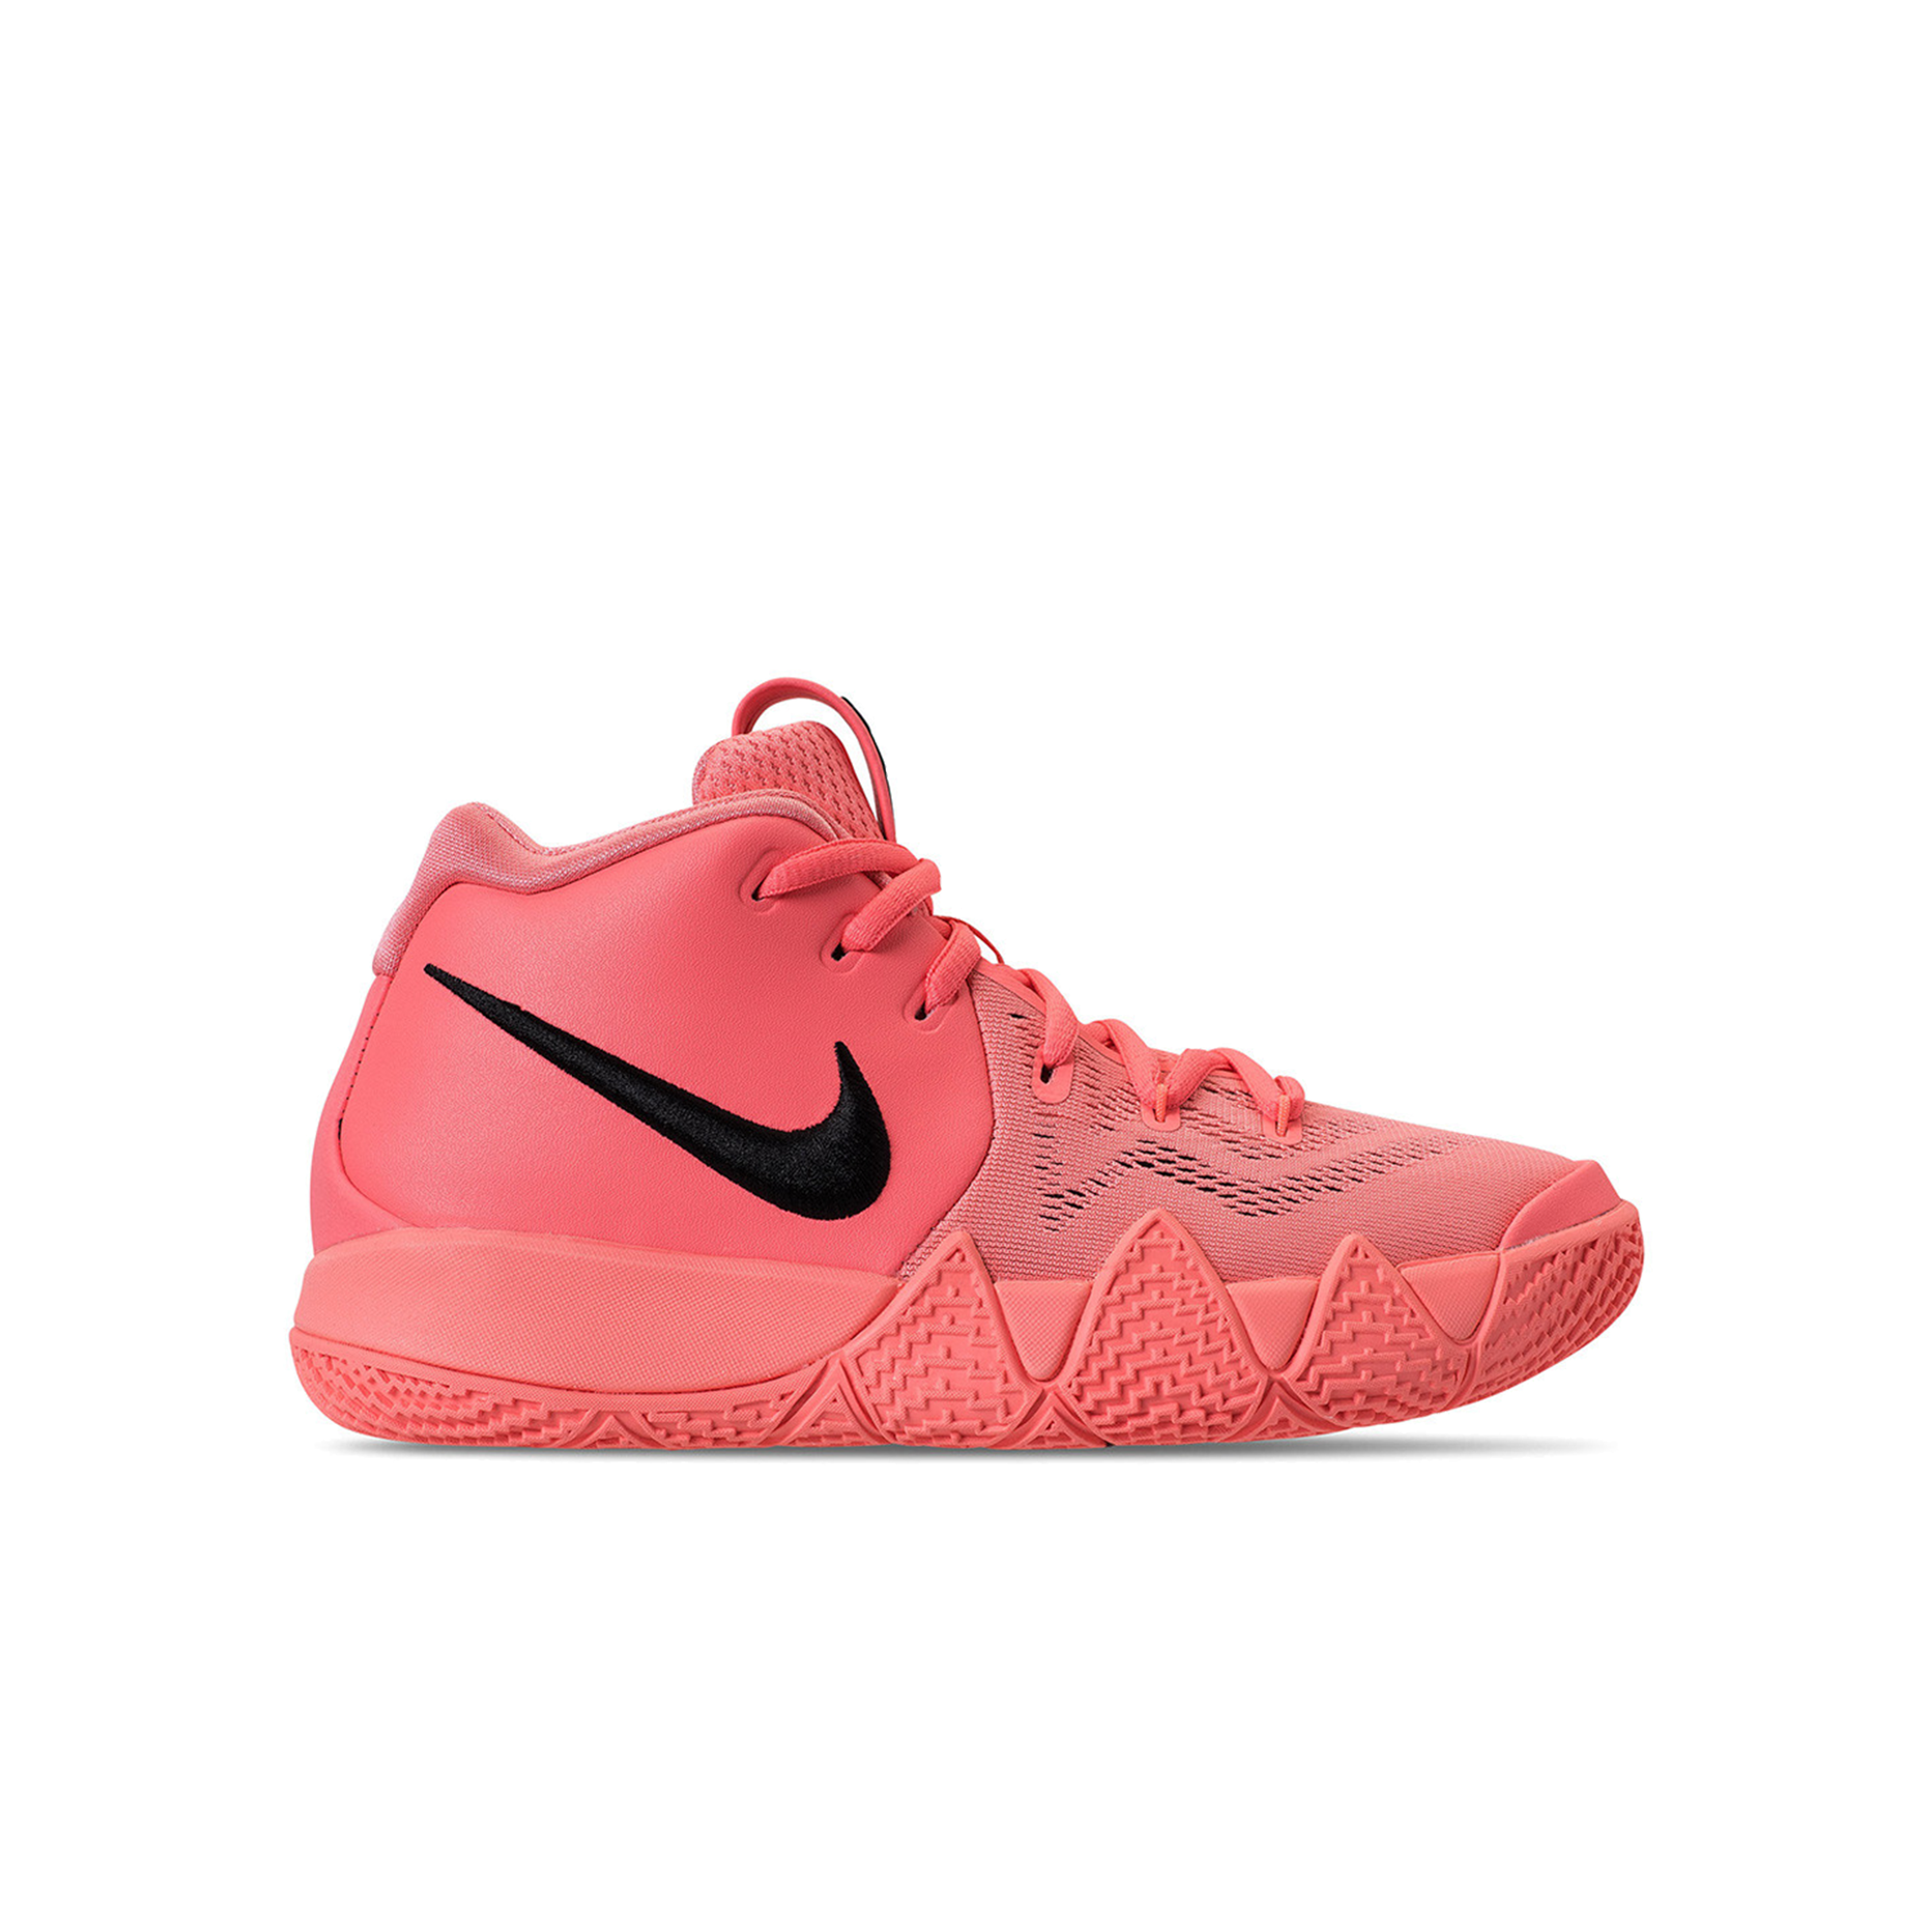 kyrie 4 basketball shoes youth